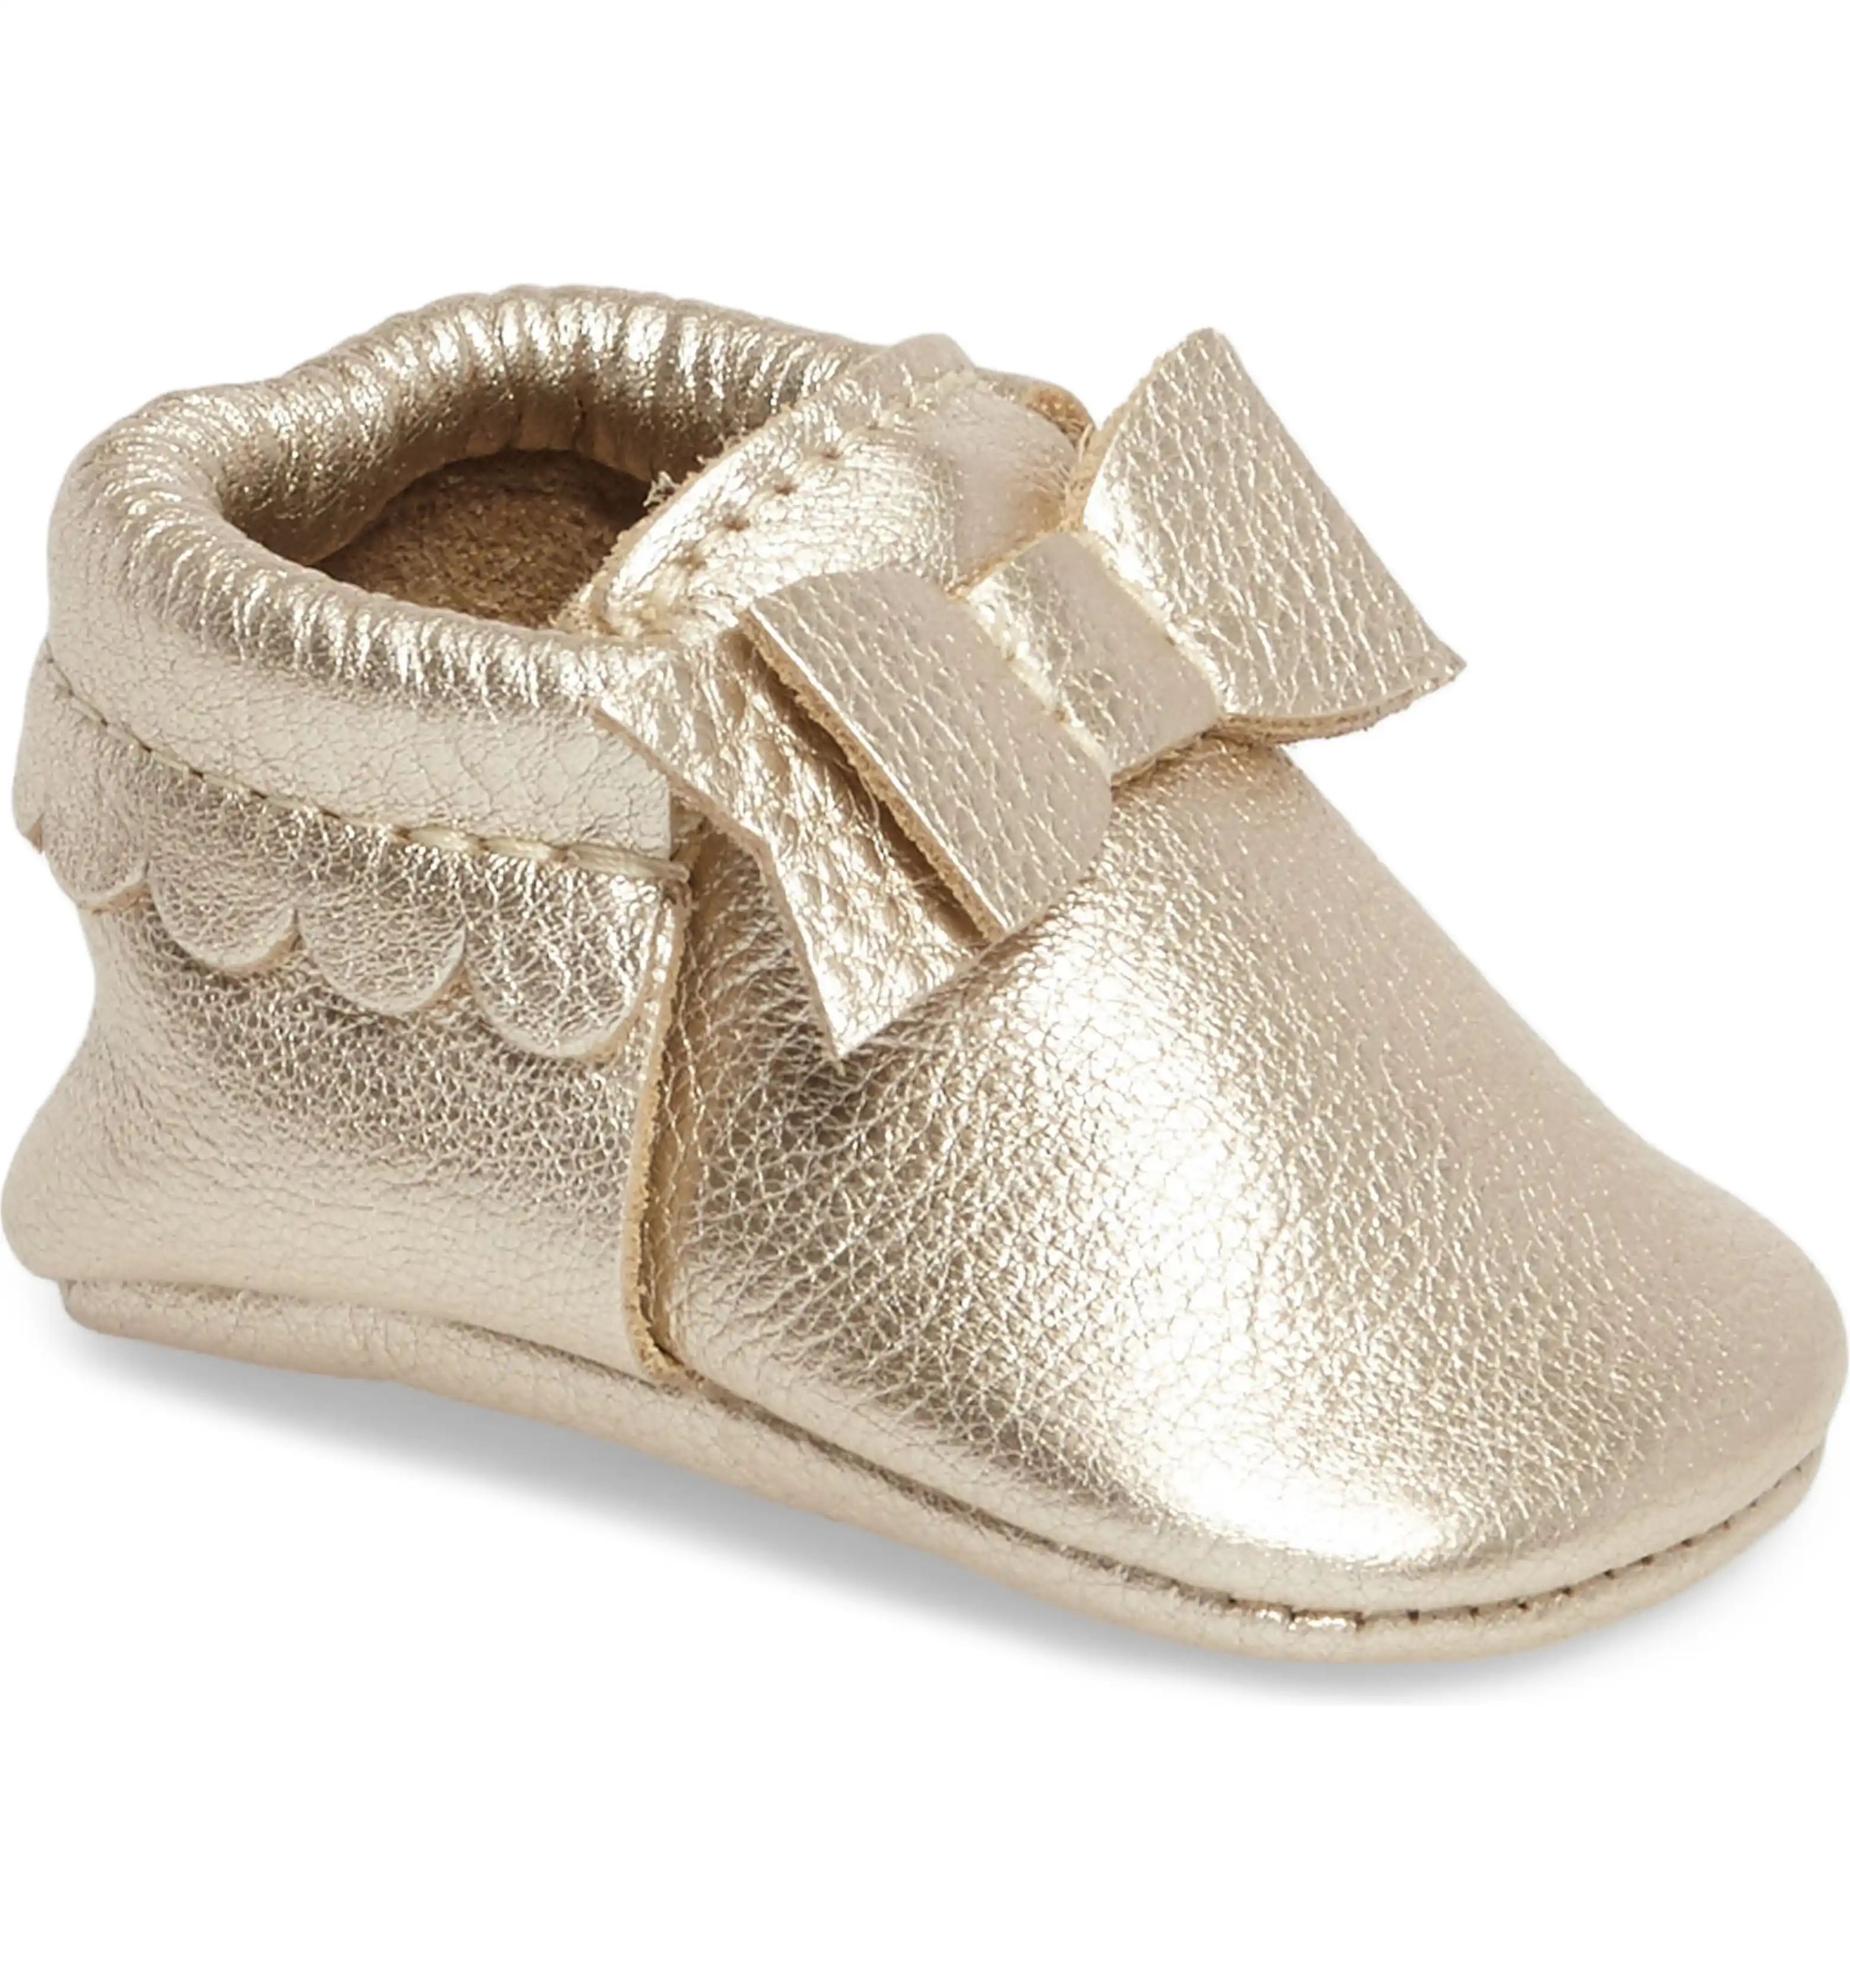 Metallic Bow Moccasin | Nordstrom